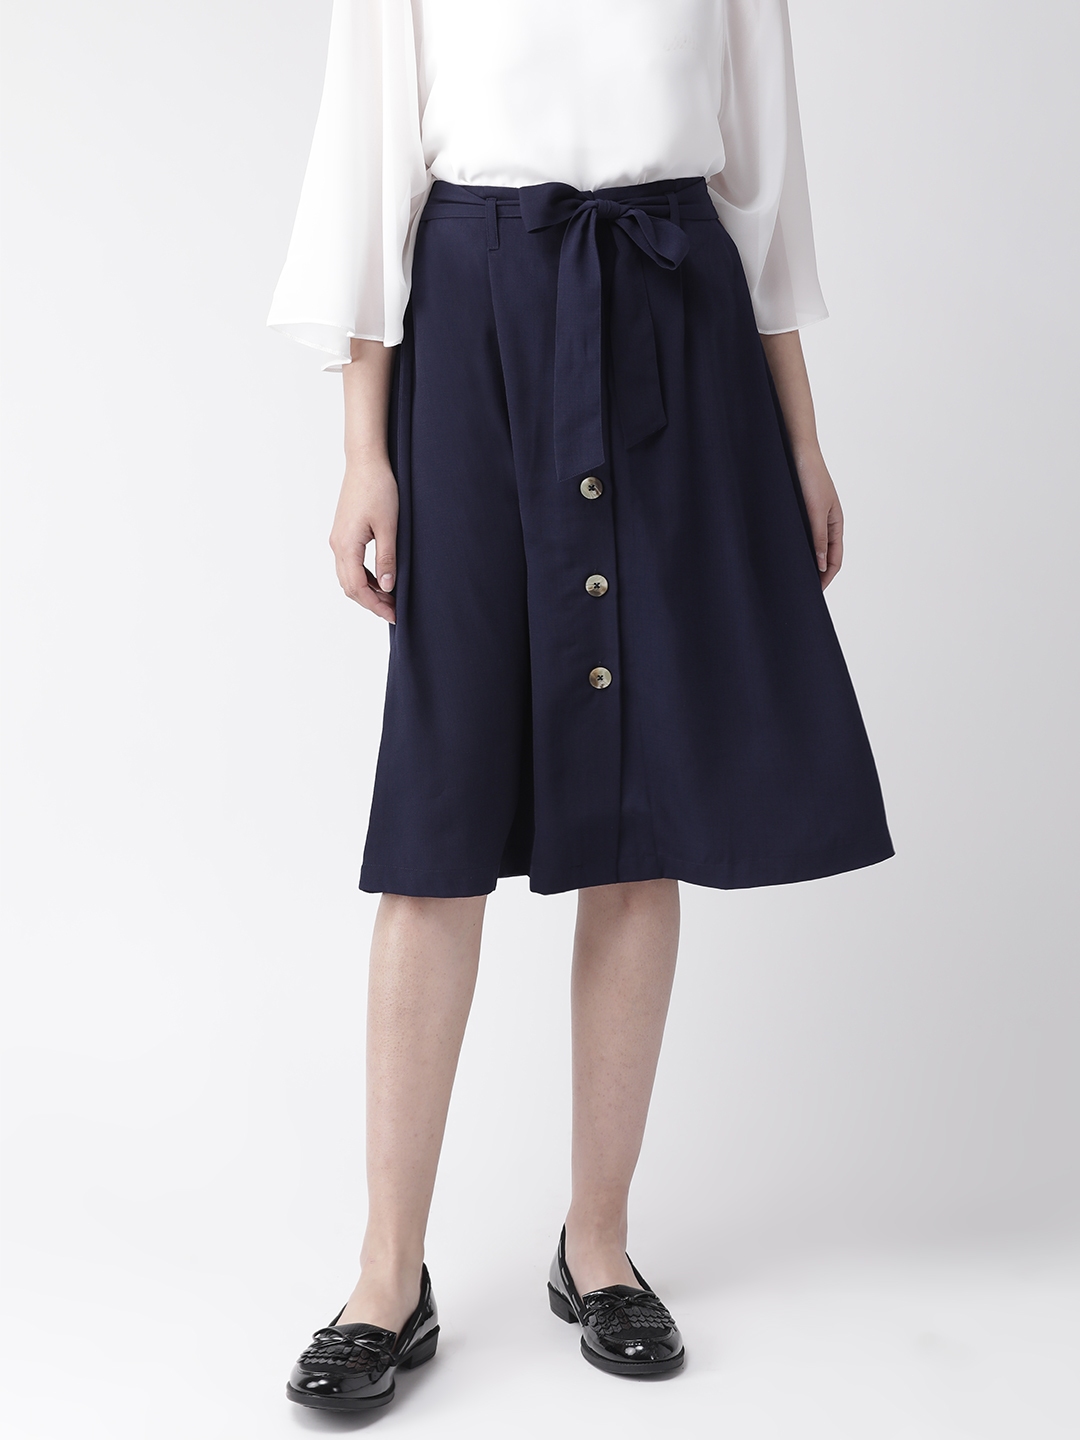 Buy 20Dresses Women Navy Blue Solid Button Down A Line Skirt - Skirts